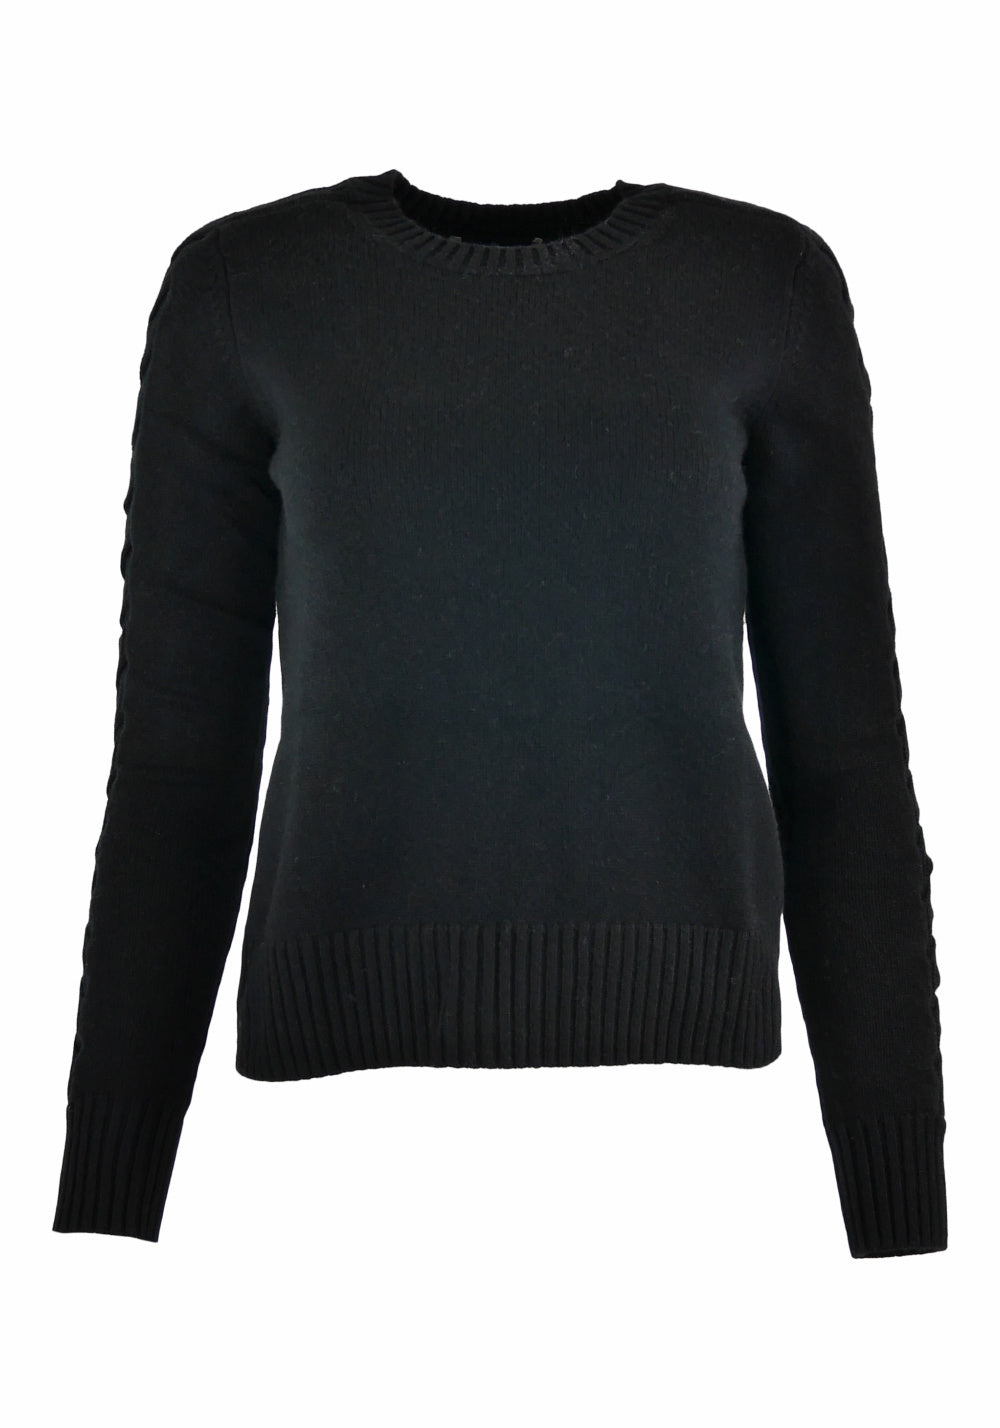 CREWNECK SWEATER WITH OPEN CABLE SLEEVES - AUTUMN CASHMERE